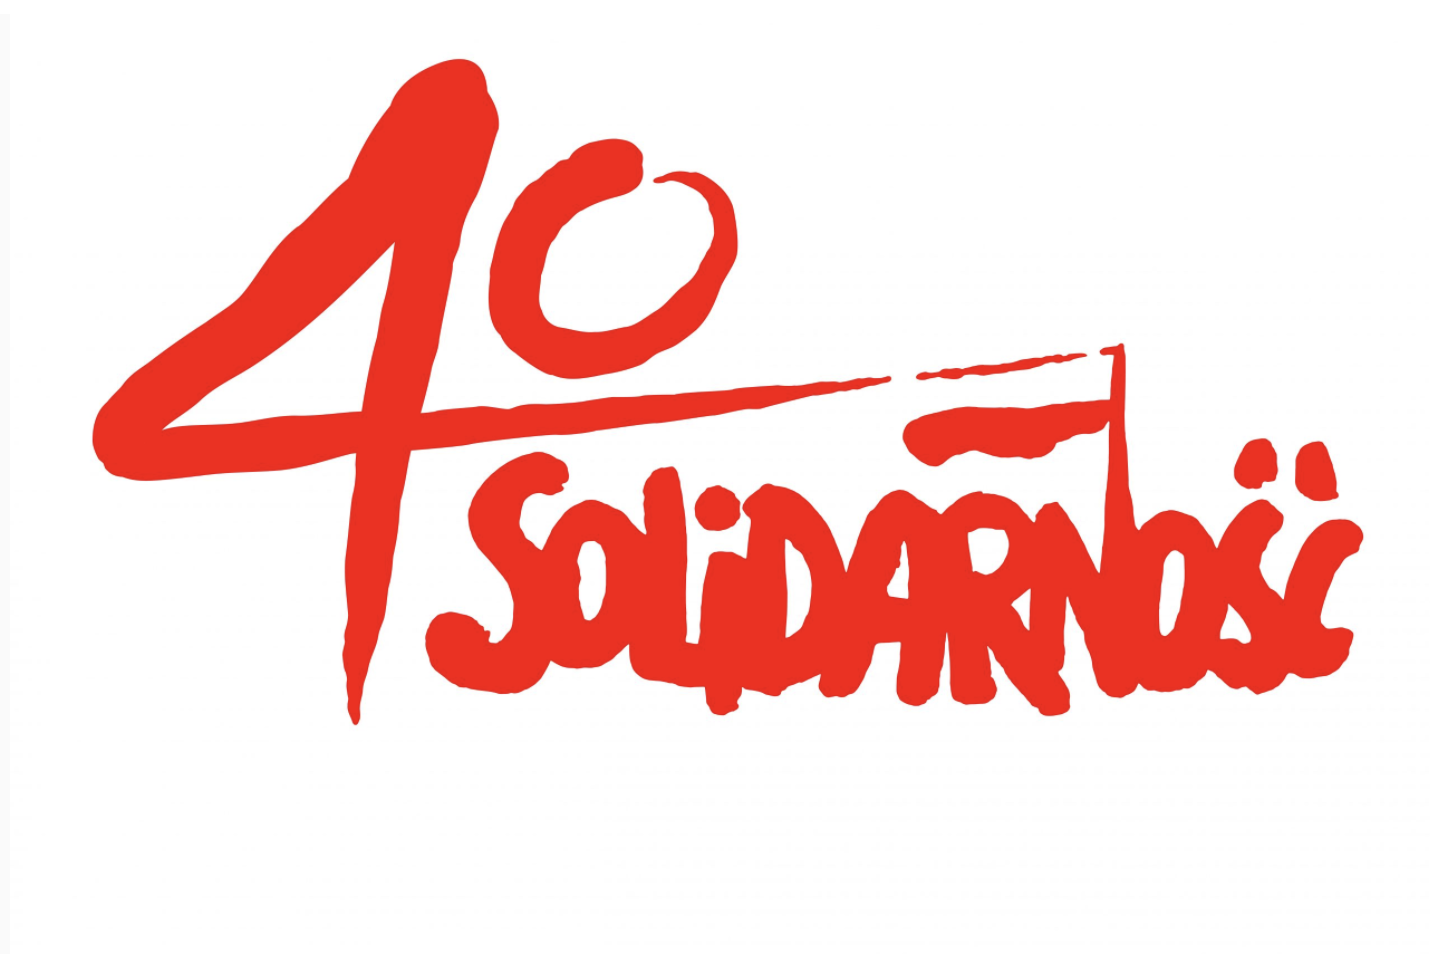 On August 30, 2020, we remembered the 40th anniversary of the signing of the August Solidarity Agreements and the 81st anniversary of the outbreak of World War II. The event took place at St. Casimir’s Parish in Newark, New Jersey.